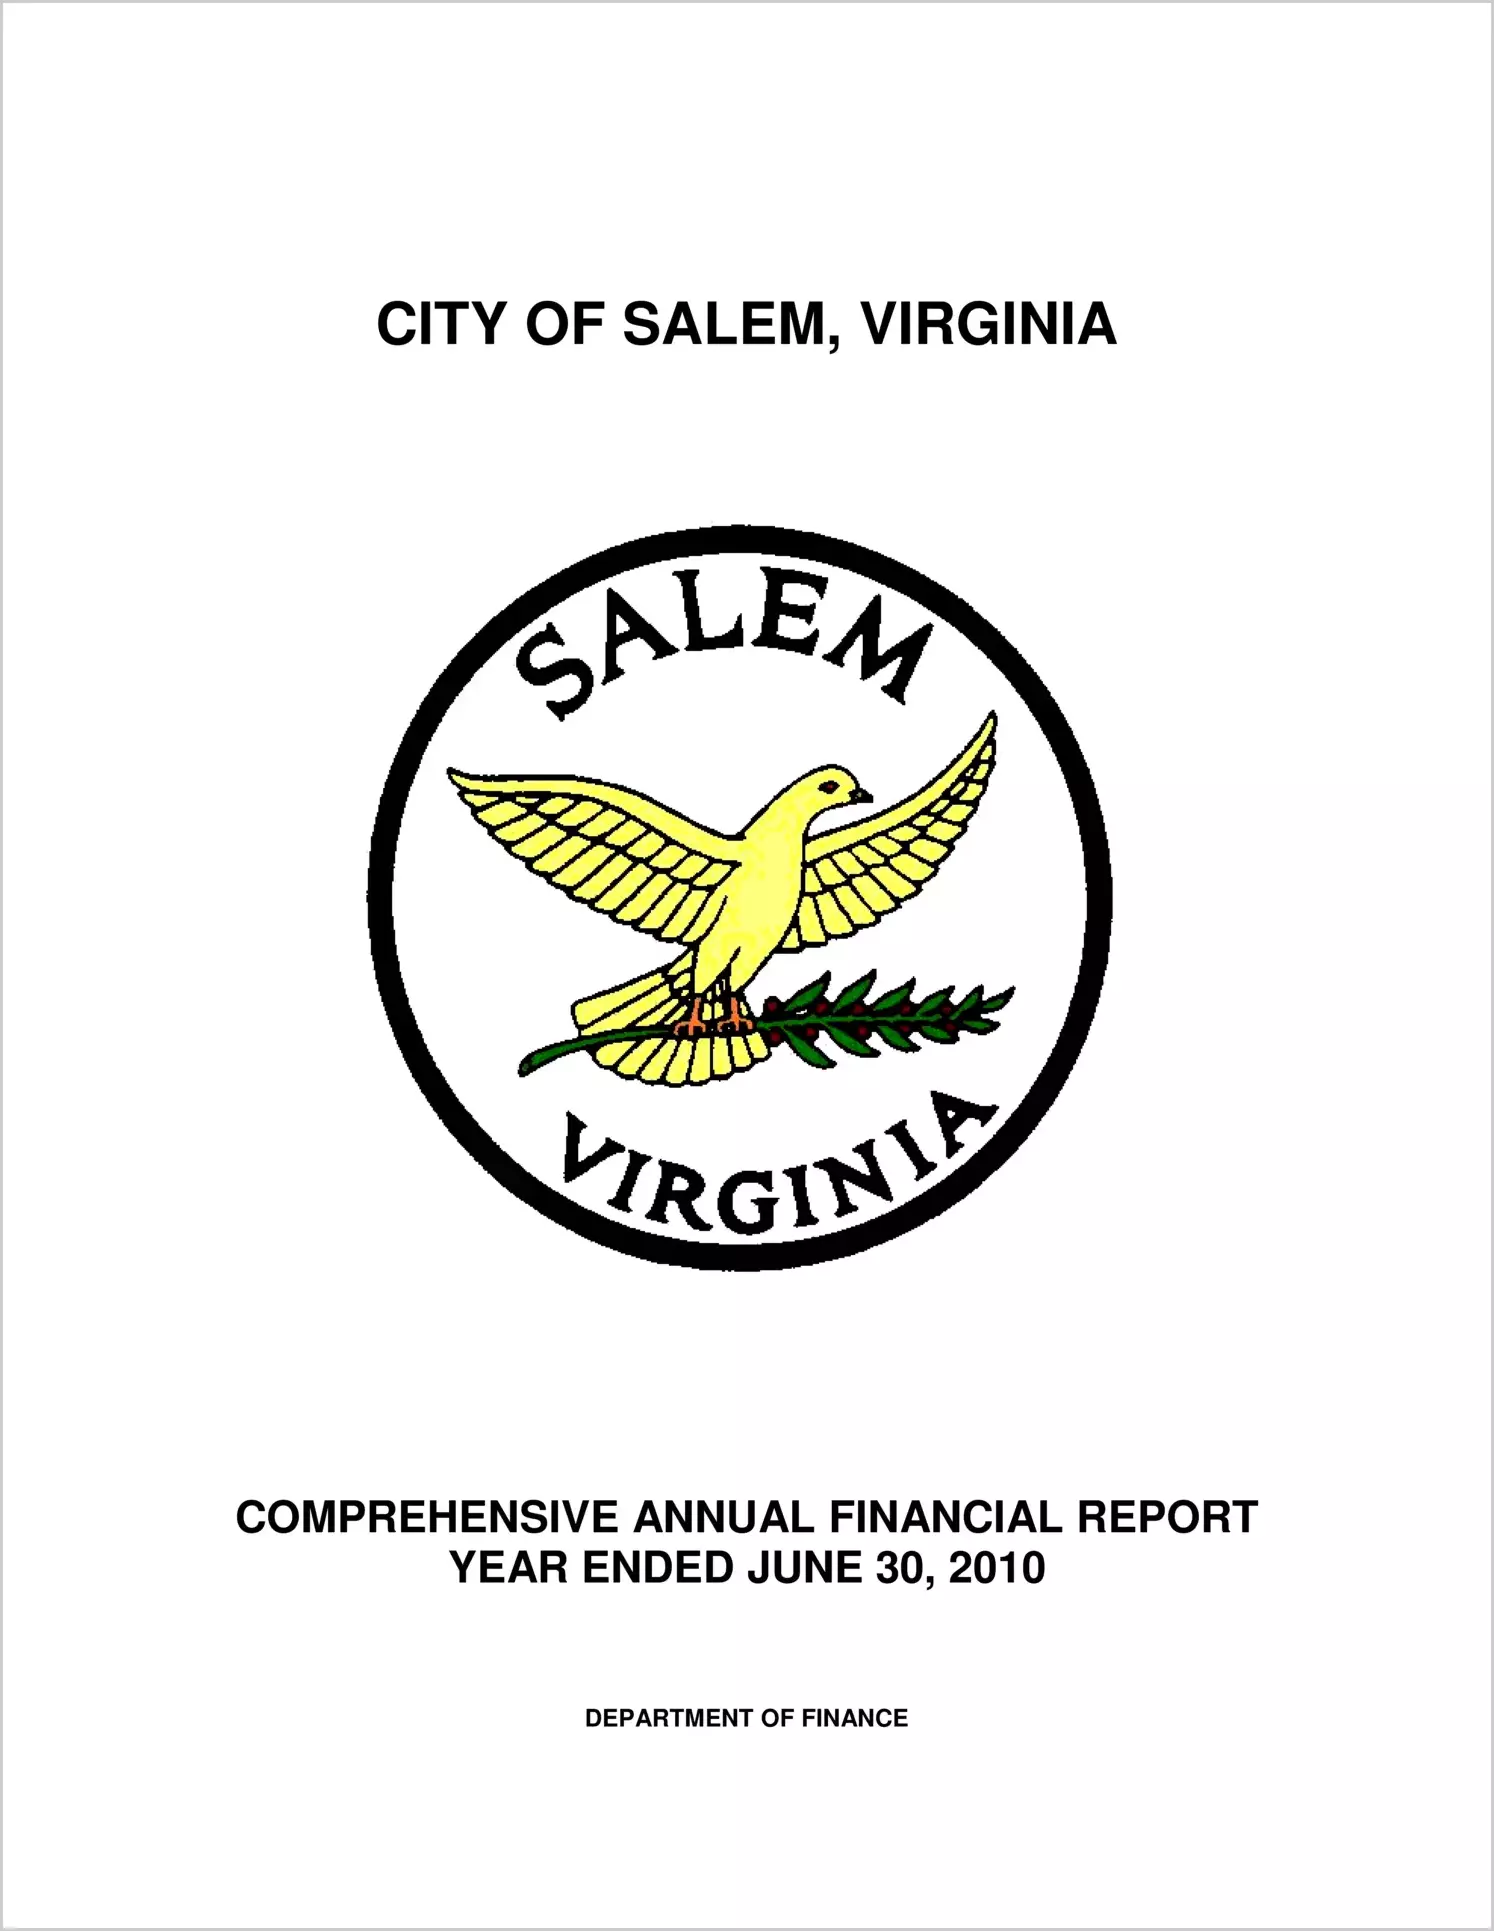 2010 Annual Financial Report for City of Salem